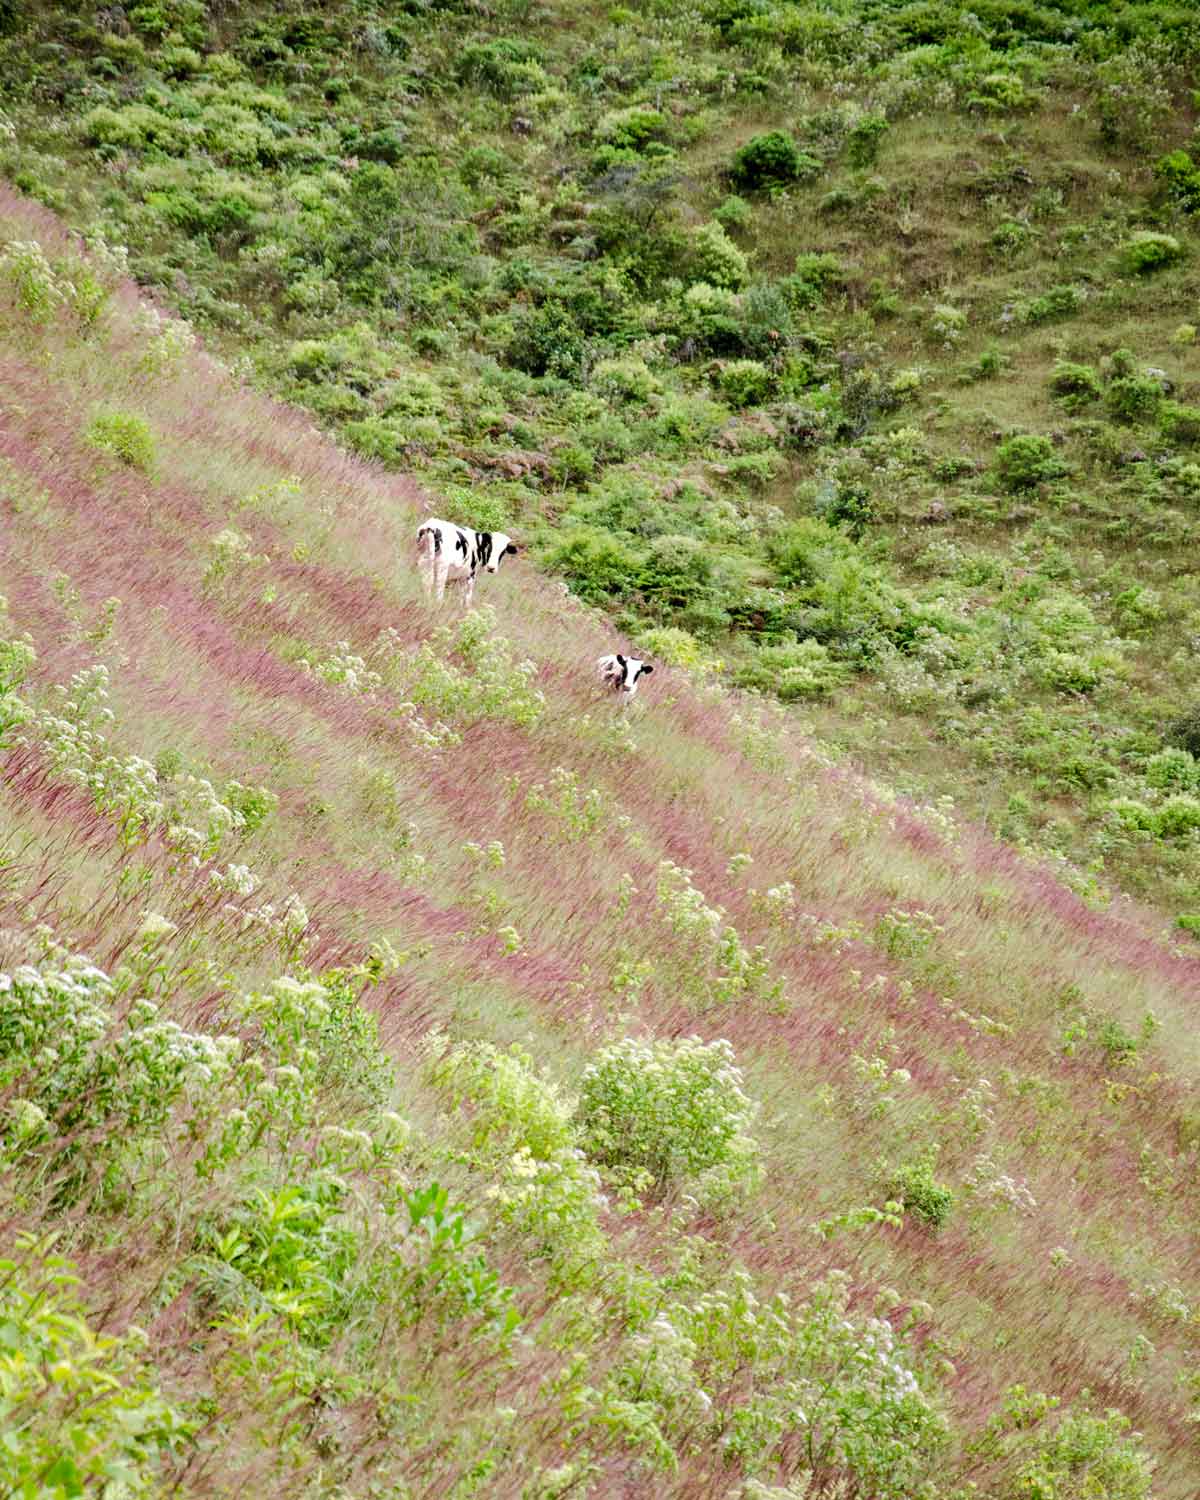 Cows grazing in a field tinted purple by yaragua, Vilcambamba, Ecuador | ©Angela Drake